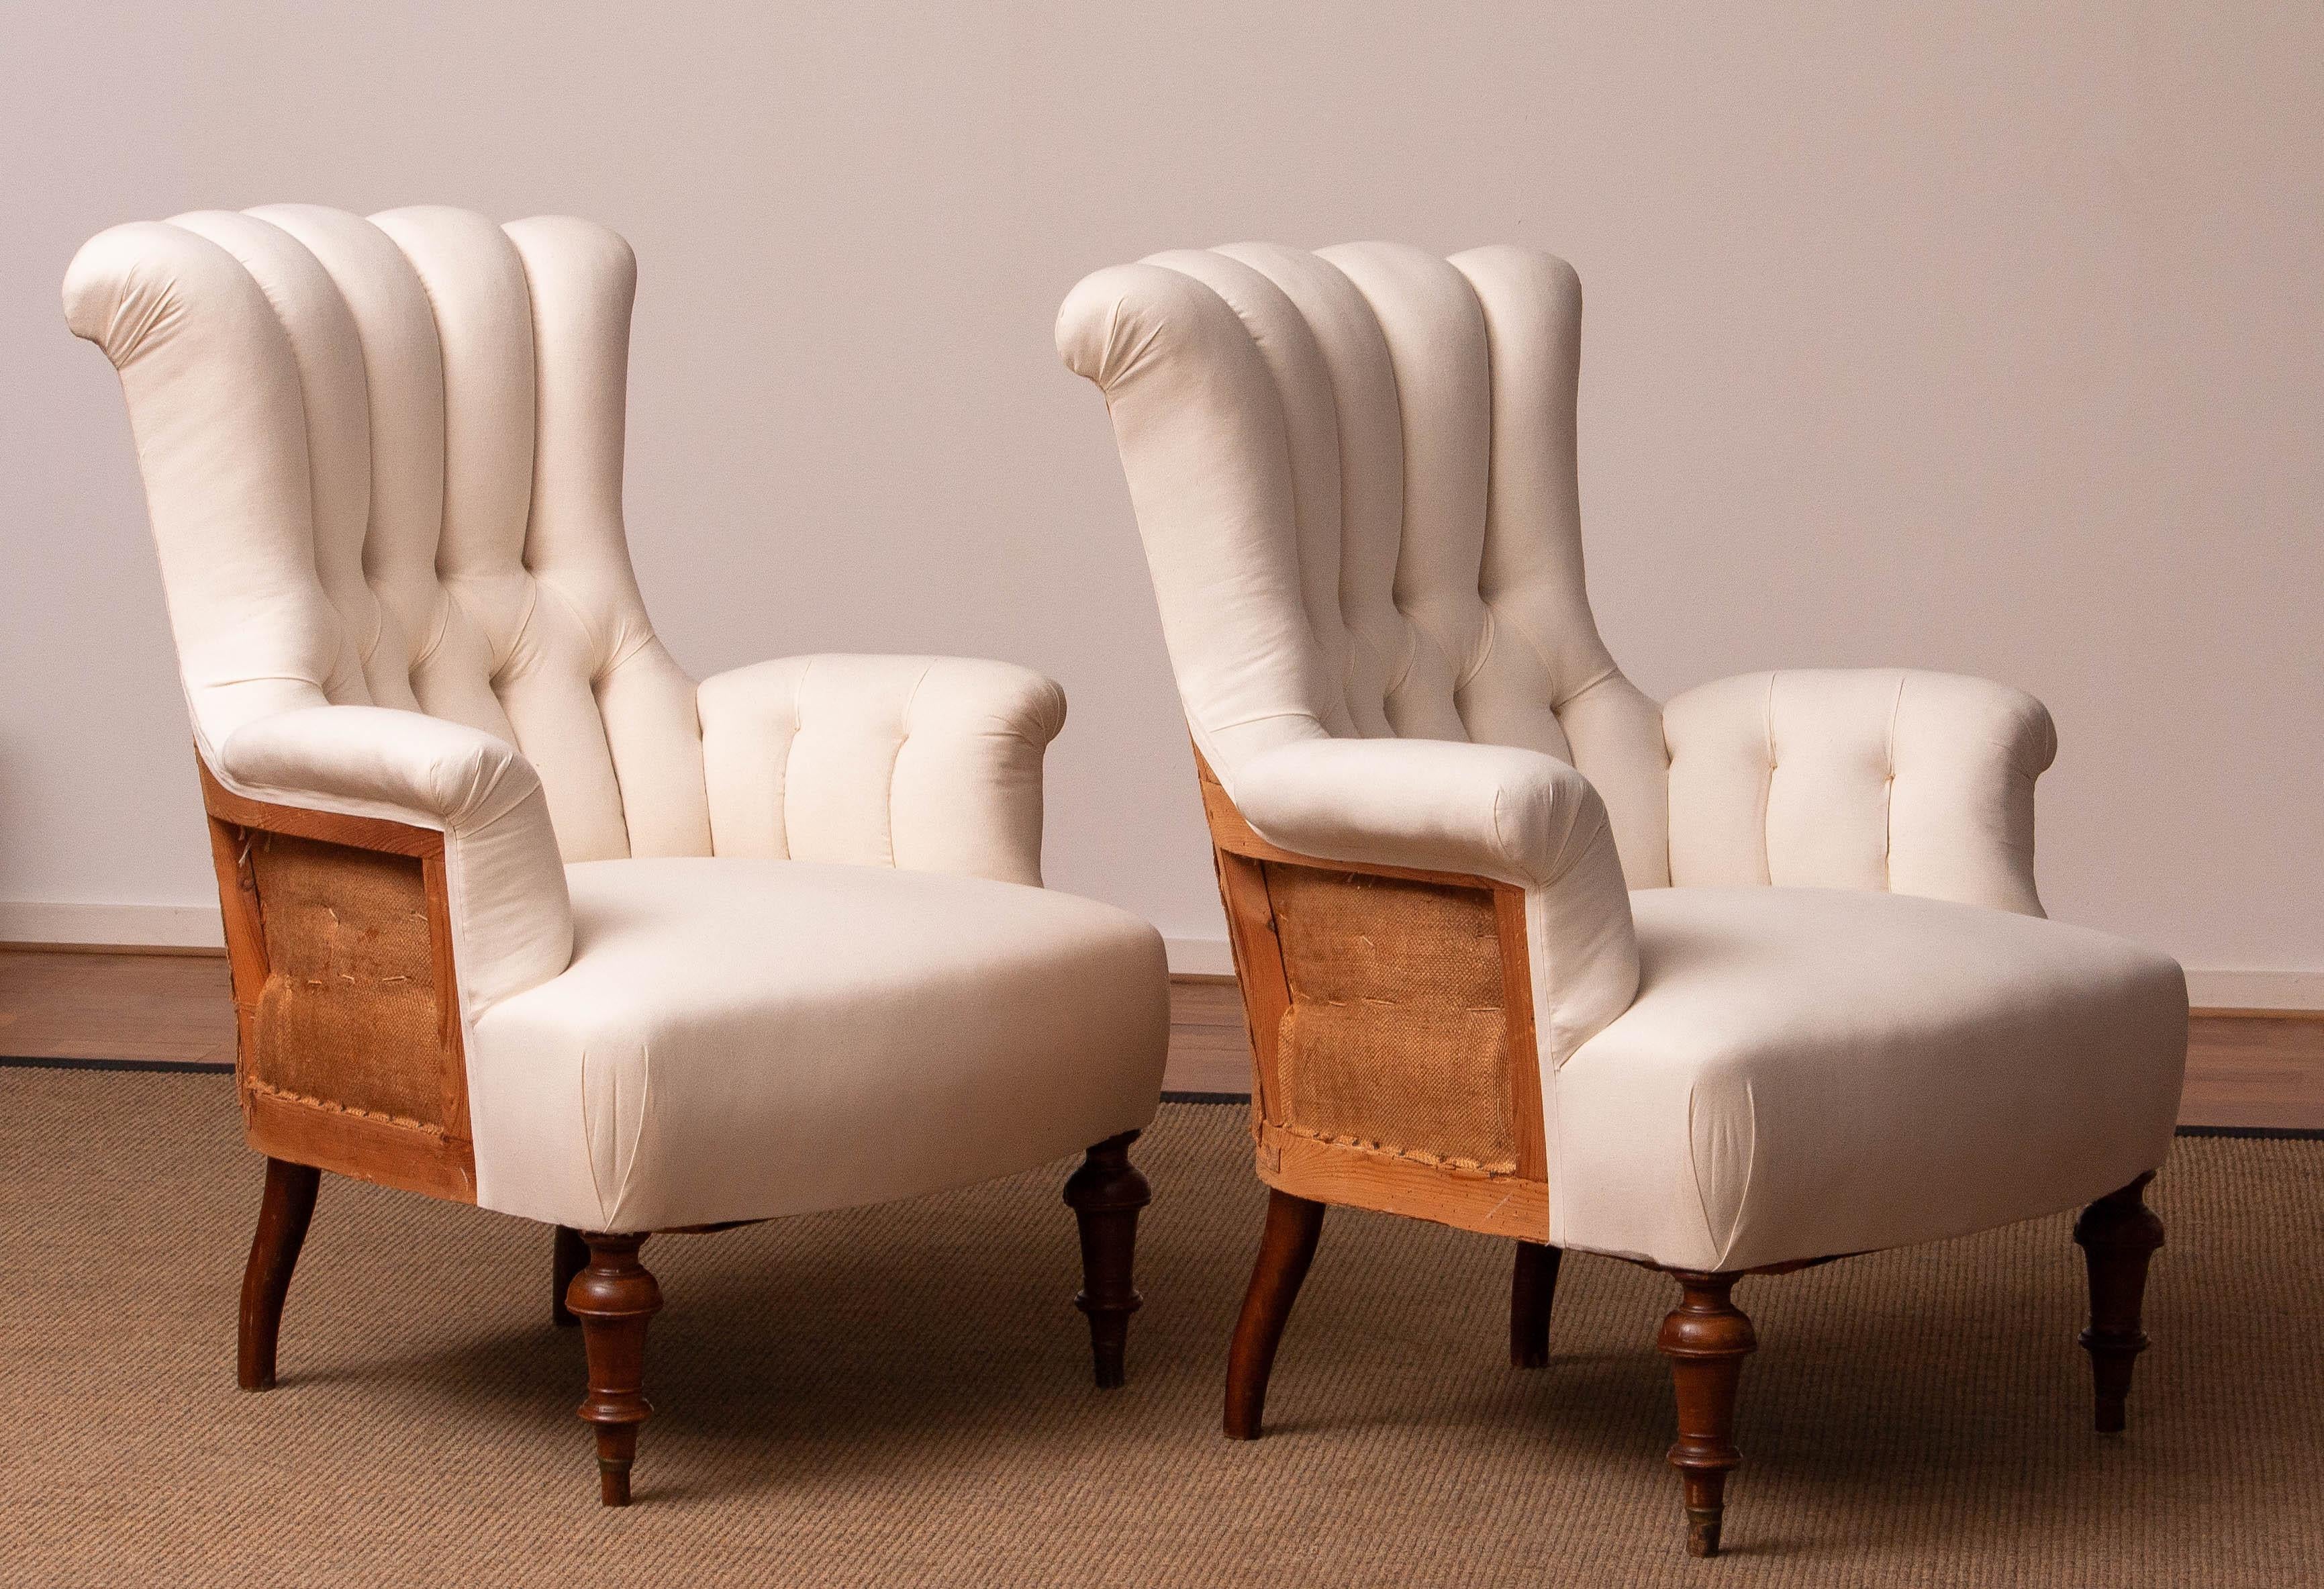 Swedish Pair Domestic Cotton Victorian 'Deconstructed' Tufted Scroll-back Chair, 1900 For Sale